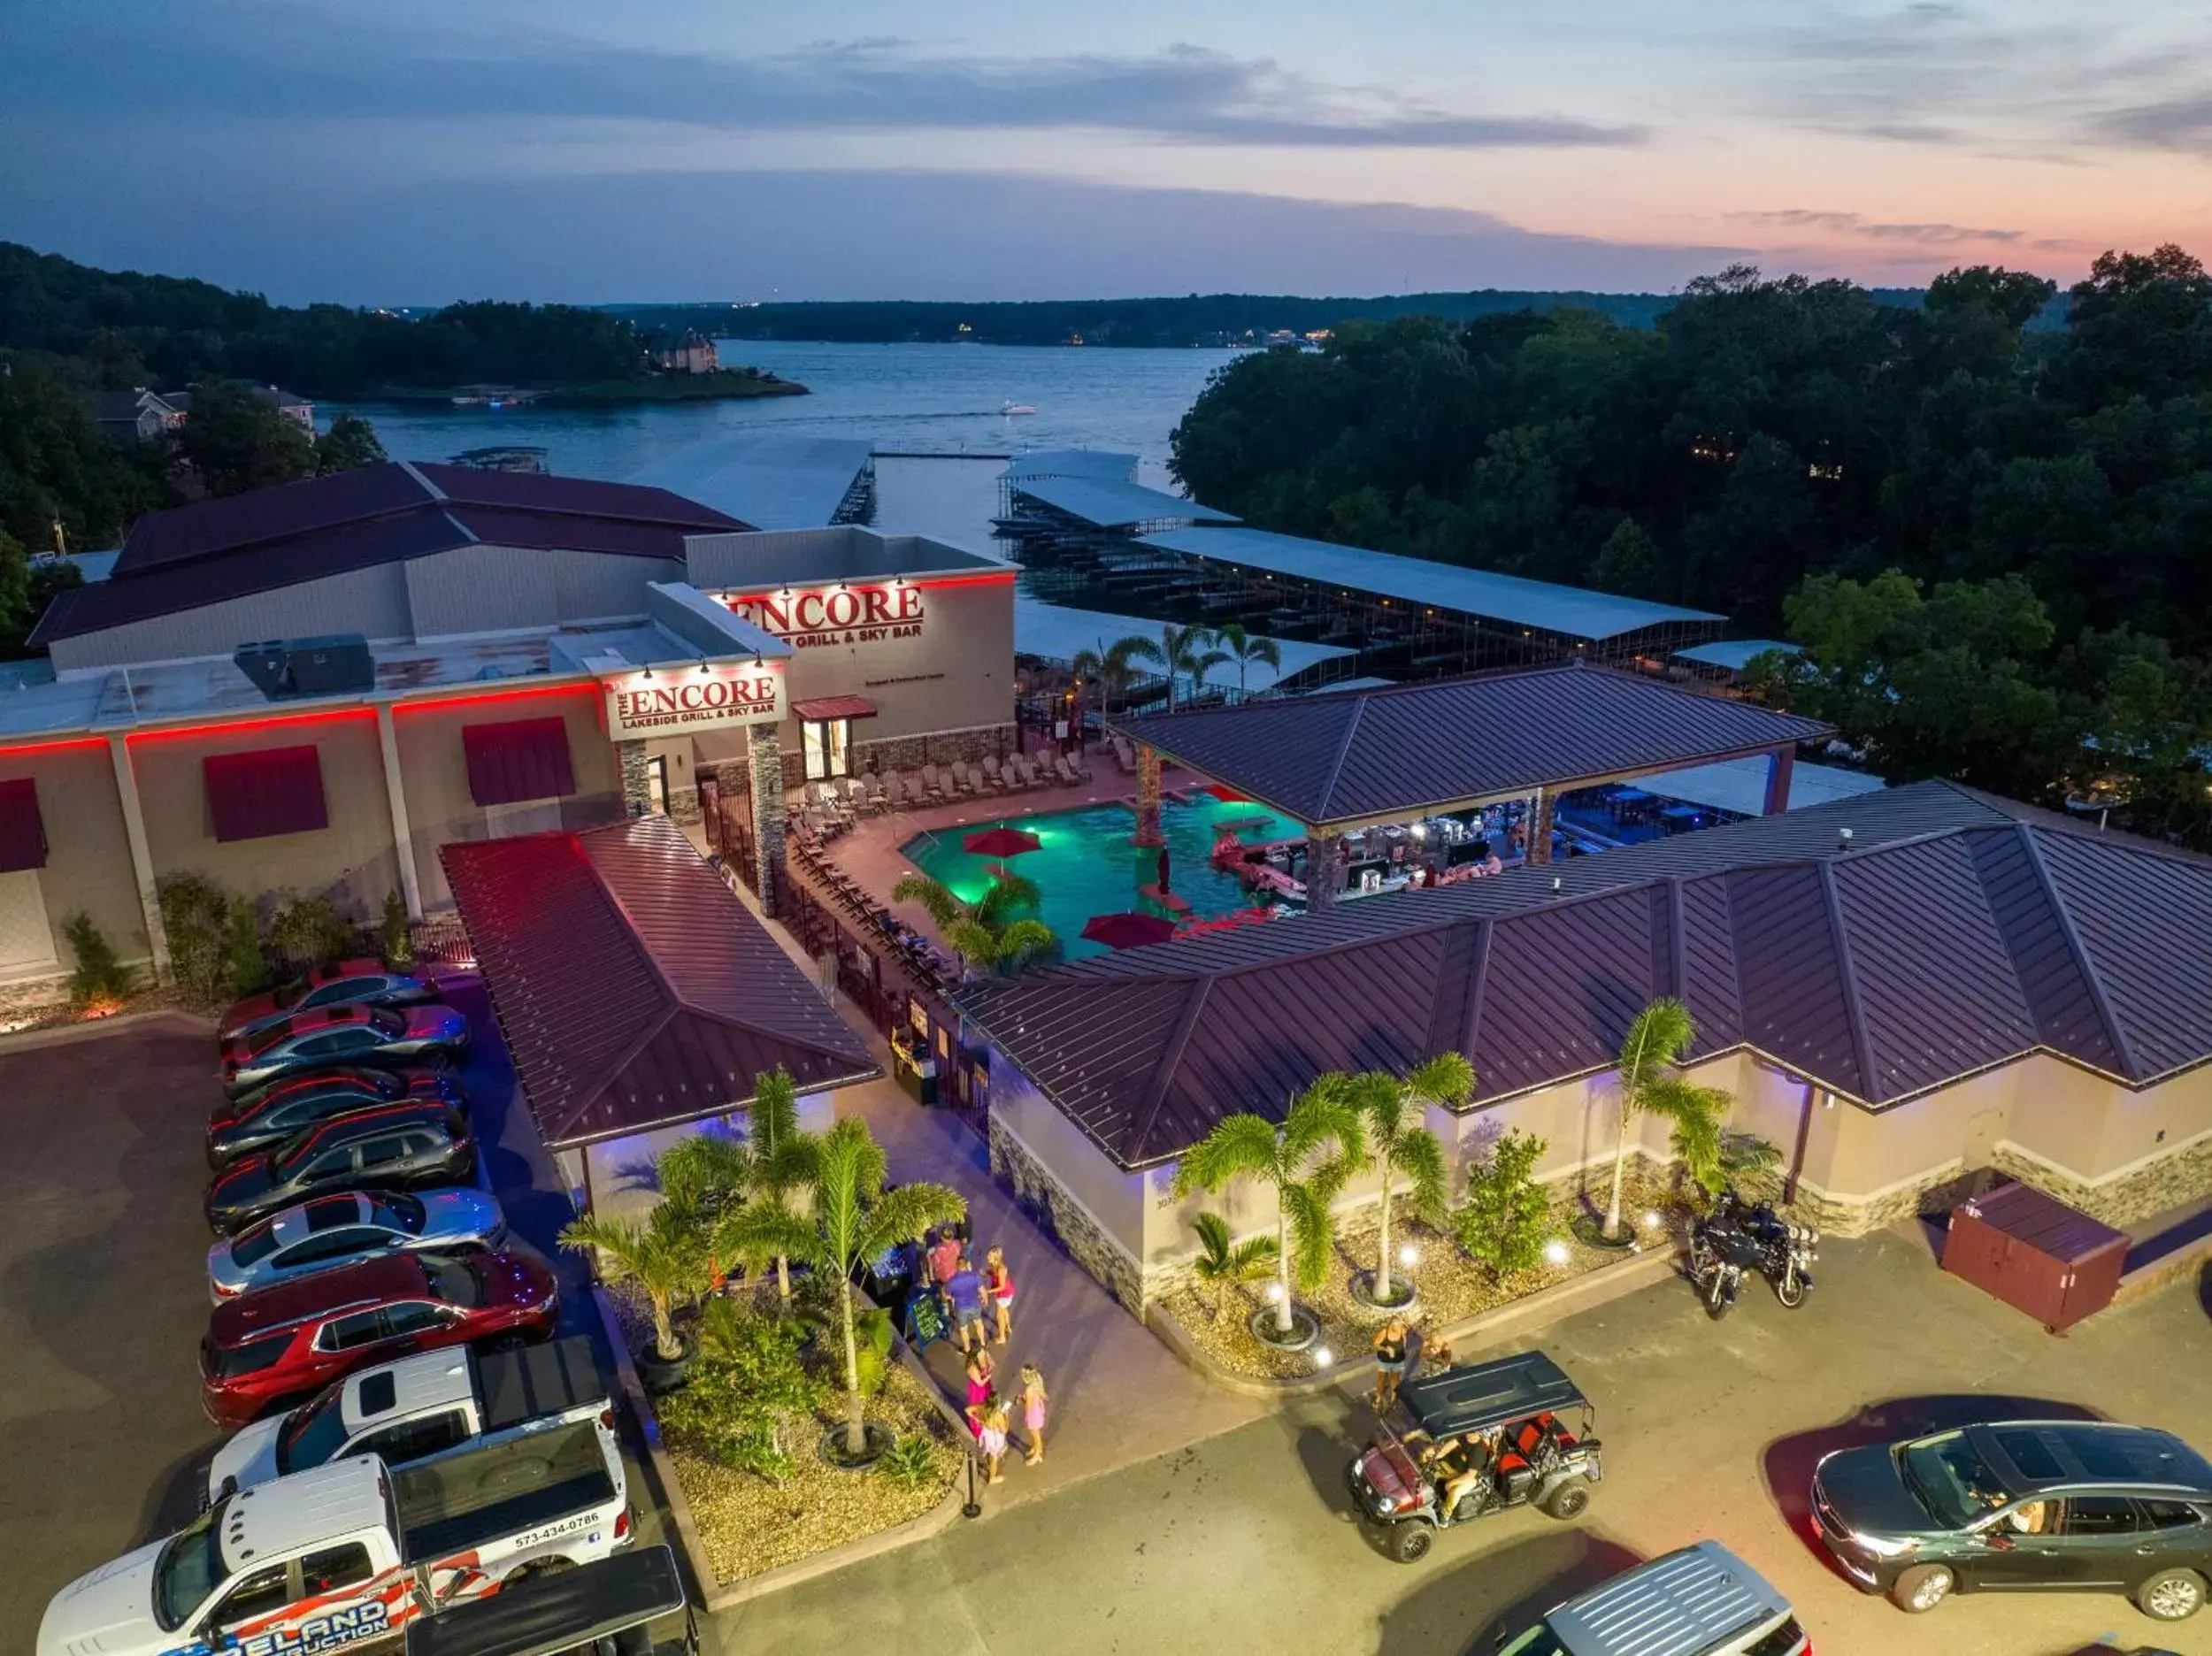 Pool view, Bird's-eye View in The Resort at Lake of the Ozarks